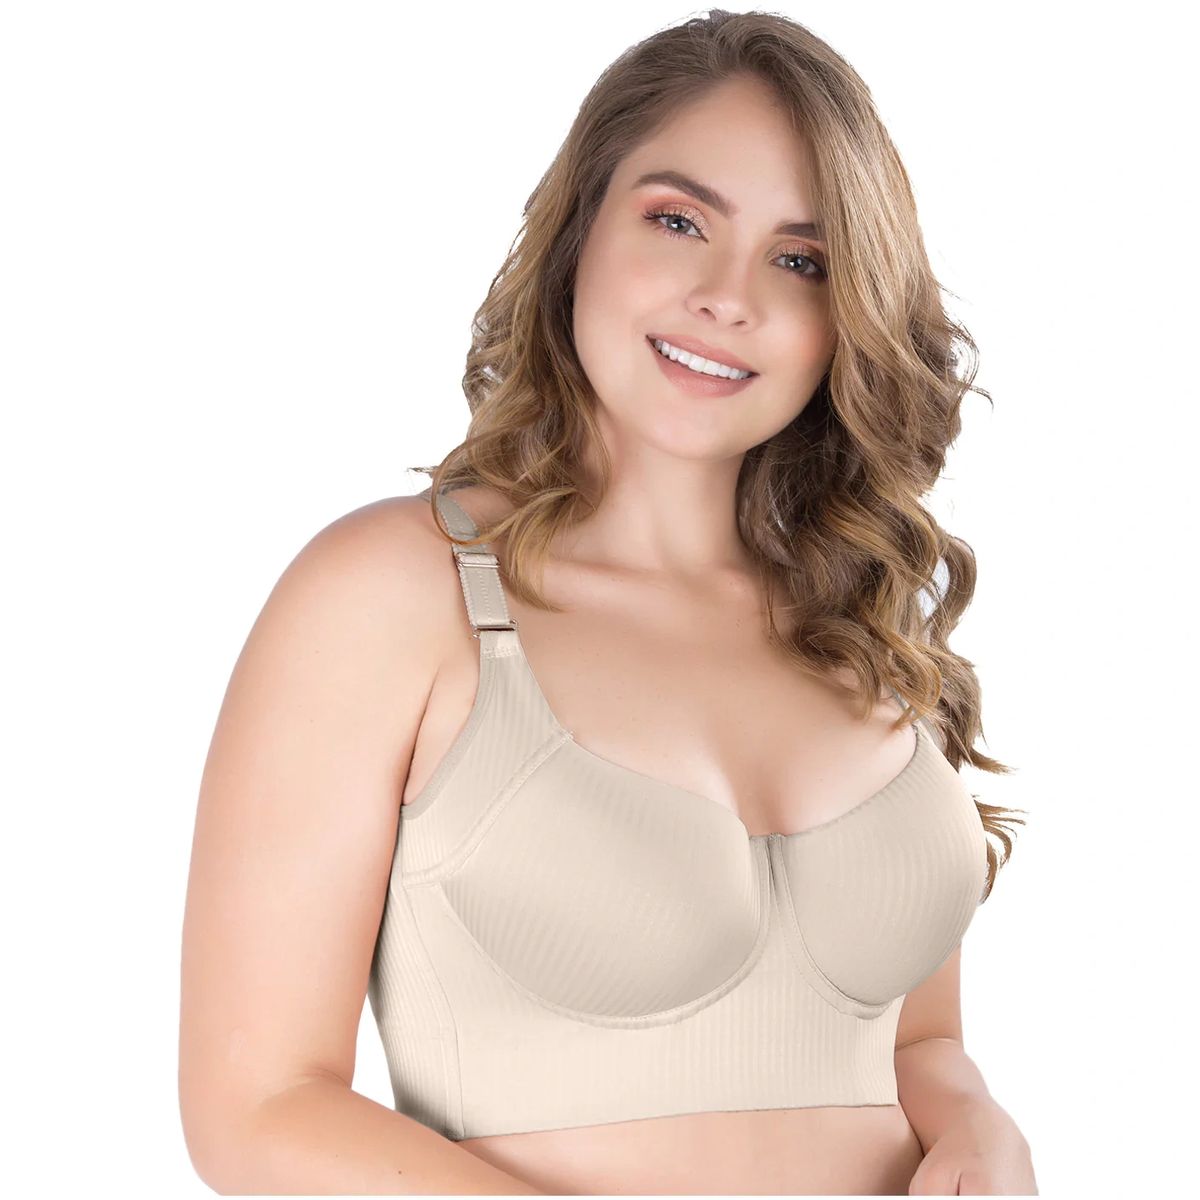 UPLADY 8542 EXTRA FIRM CONTROL FULL CUP BRA WITH SIDE SUPPORT (Size:  38B/XL, Color: Beige)